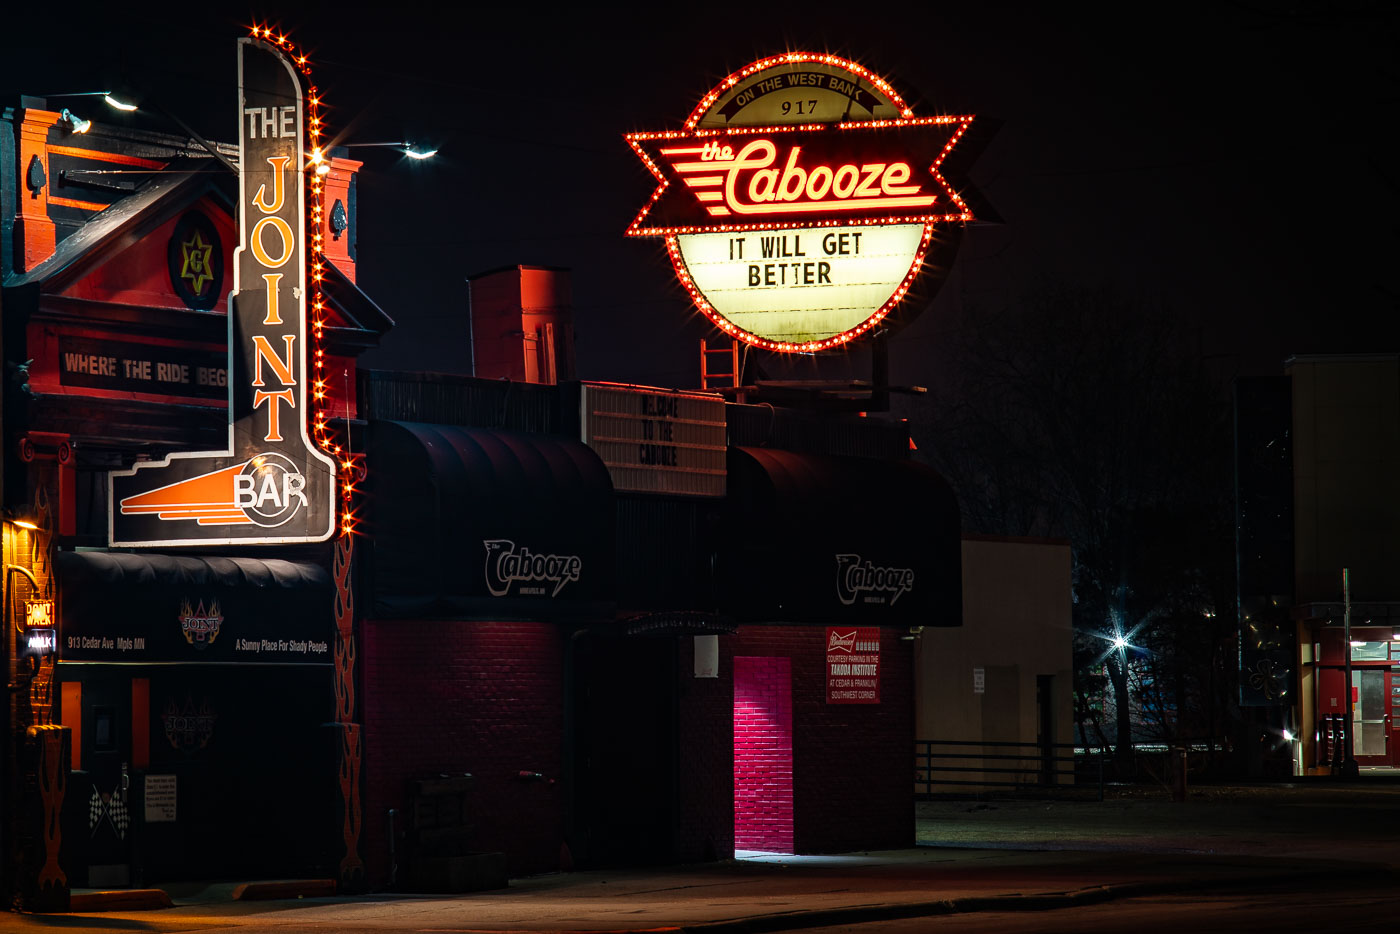 The Joint and Cabooze Bars in March 2020 during pandemic closures in Minneapolis. Marquee reads "It will get better"